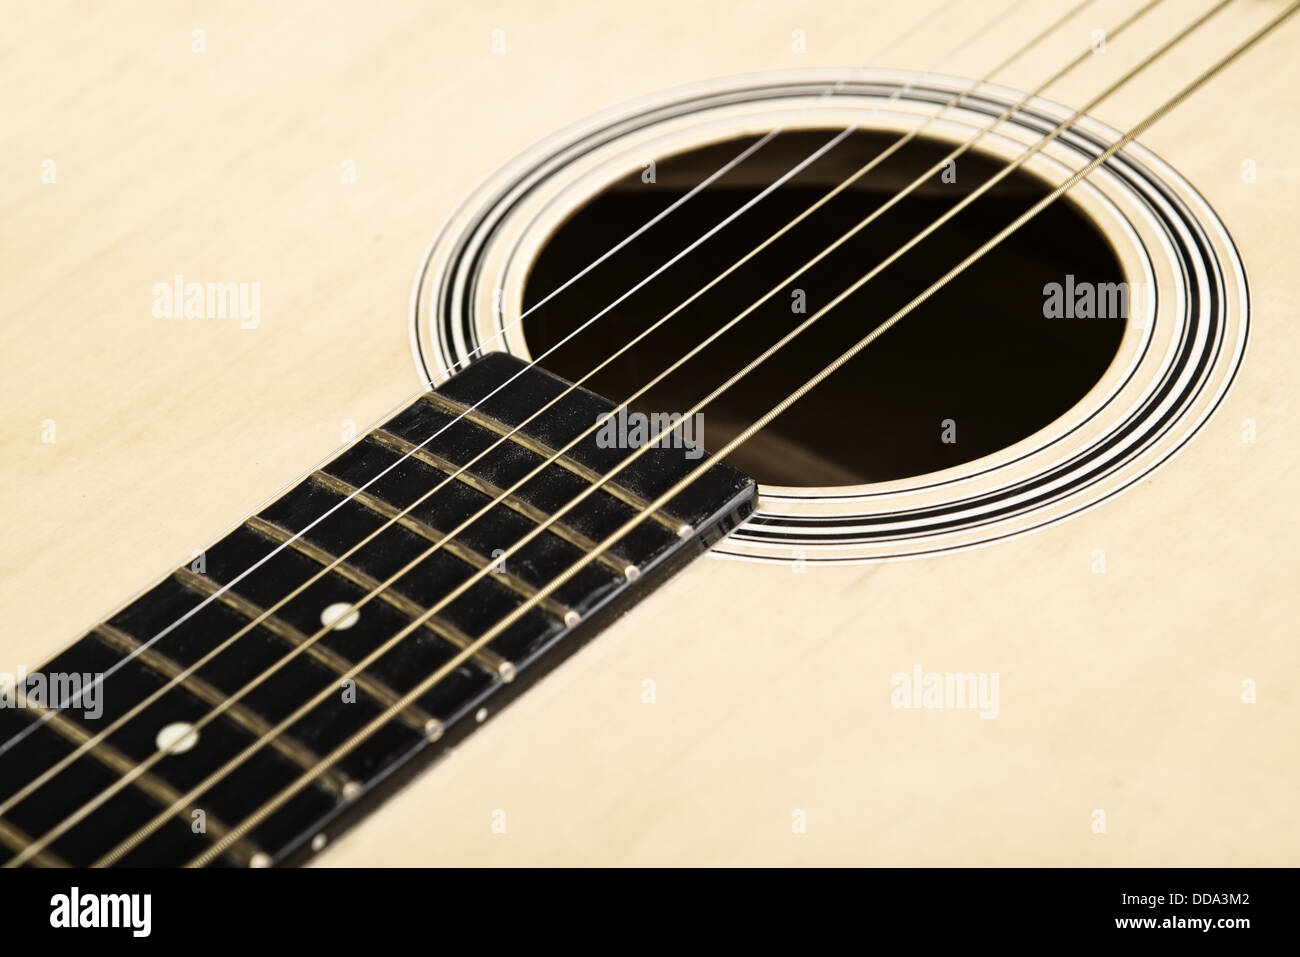 Acoustic guitar rosette and sound hole. Stock Photo